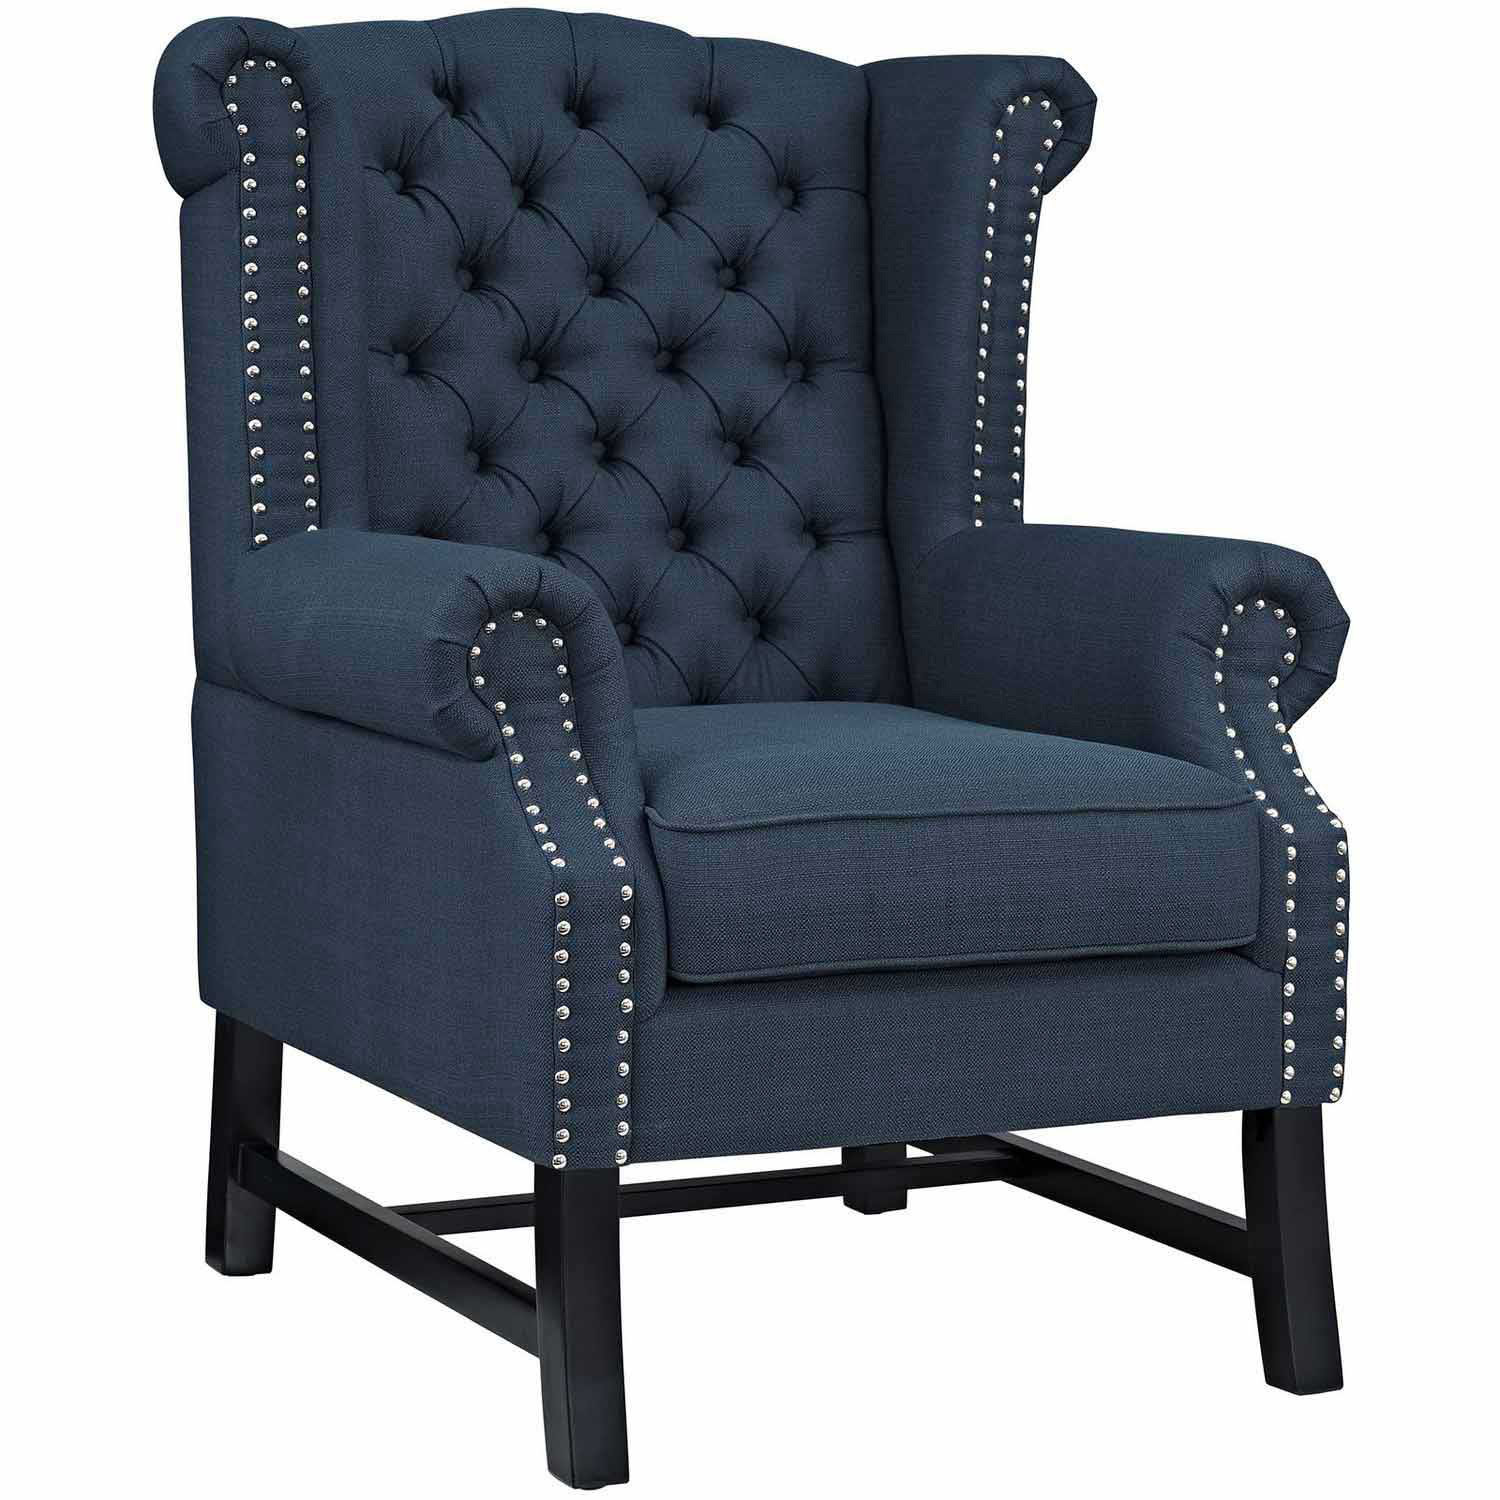 Modway Steer Fabric Arm Chair - Azure